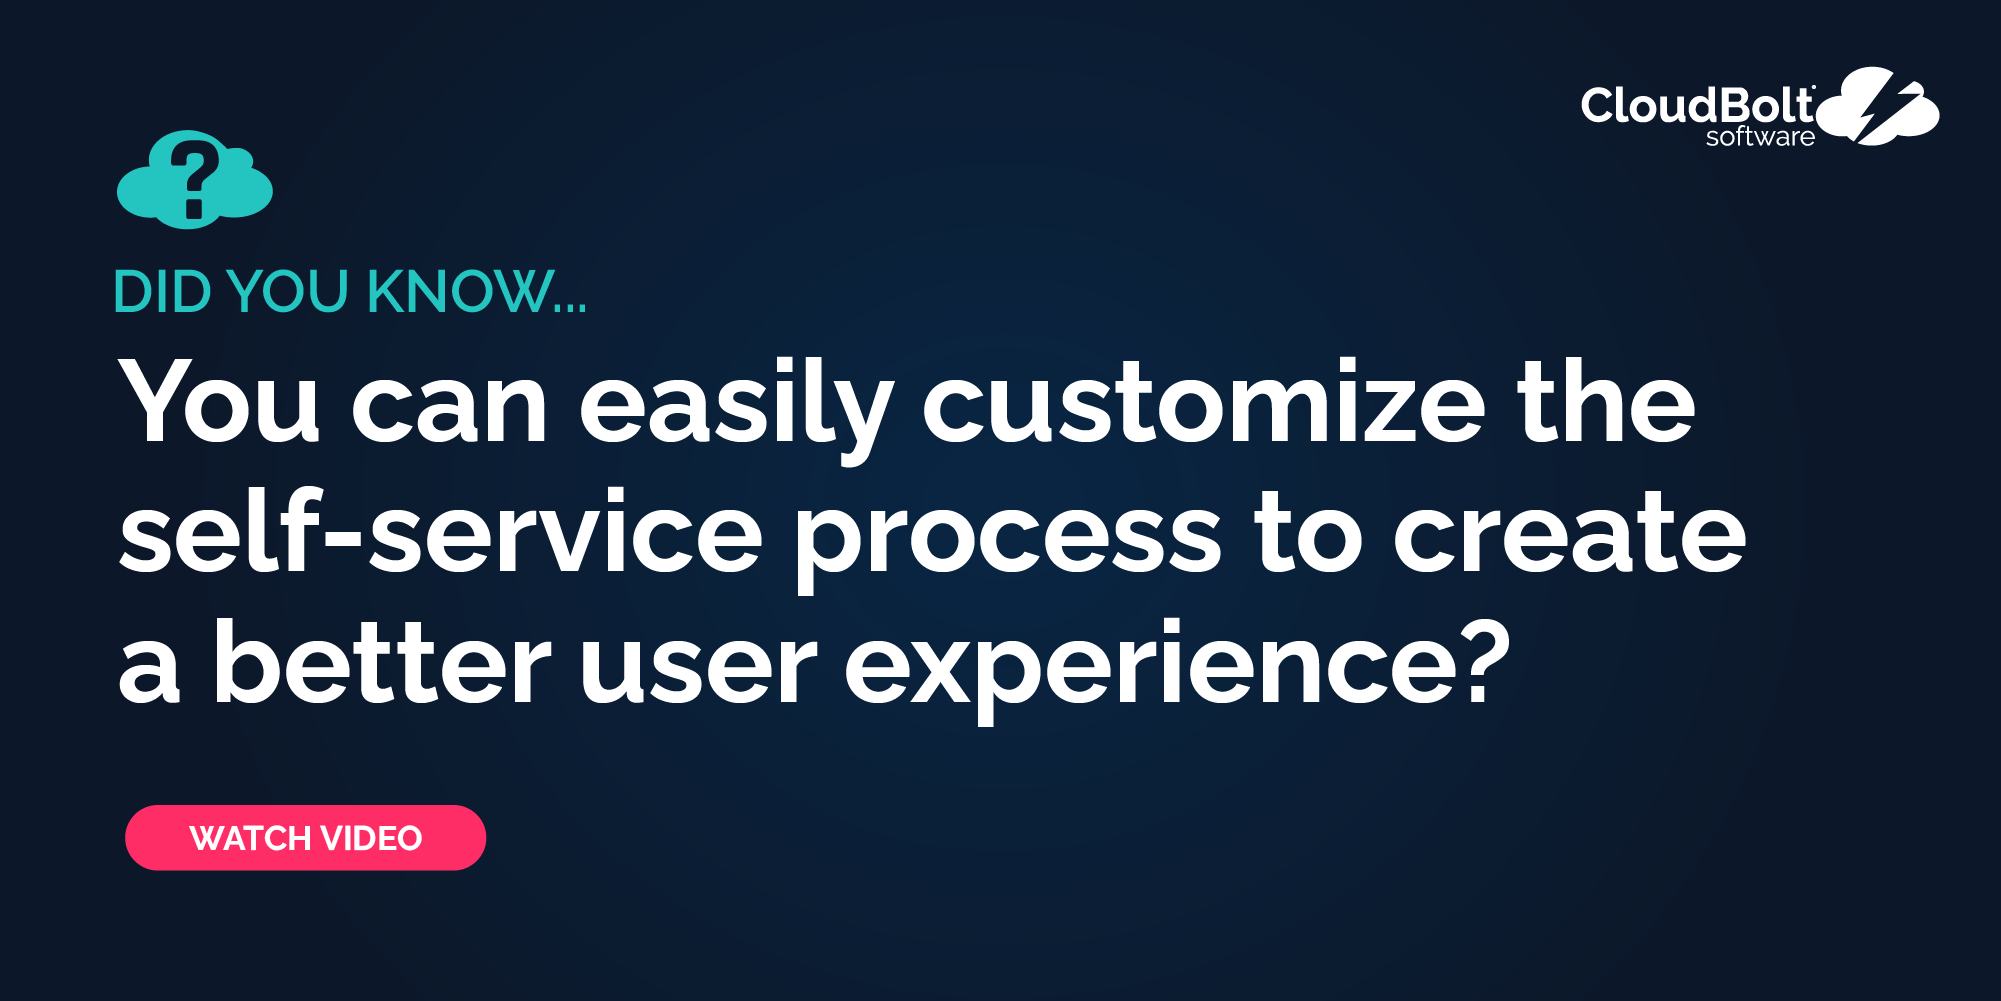 Did you know... you can easily customize a better experience?